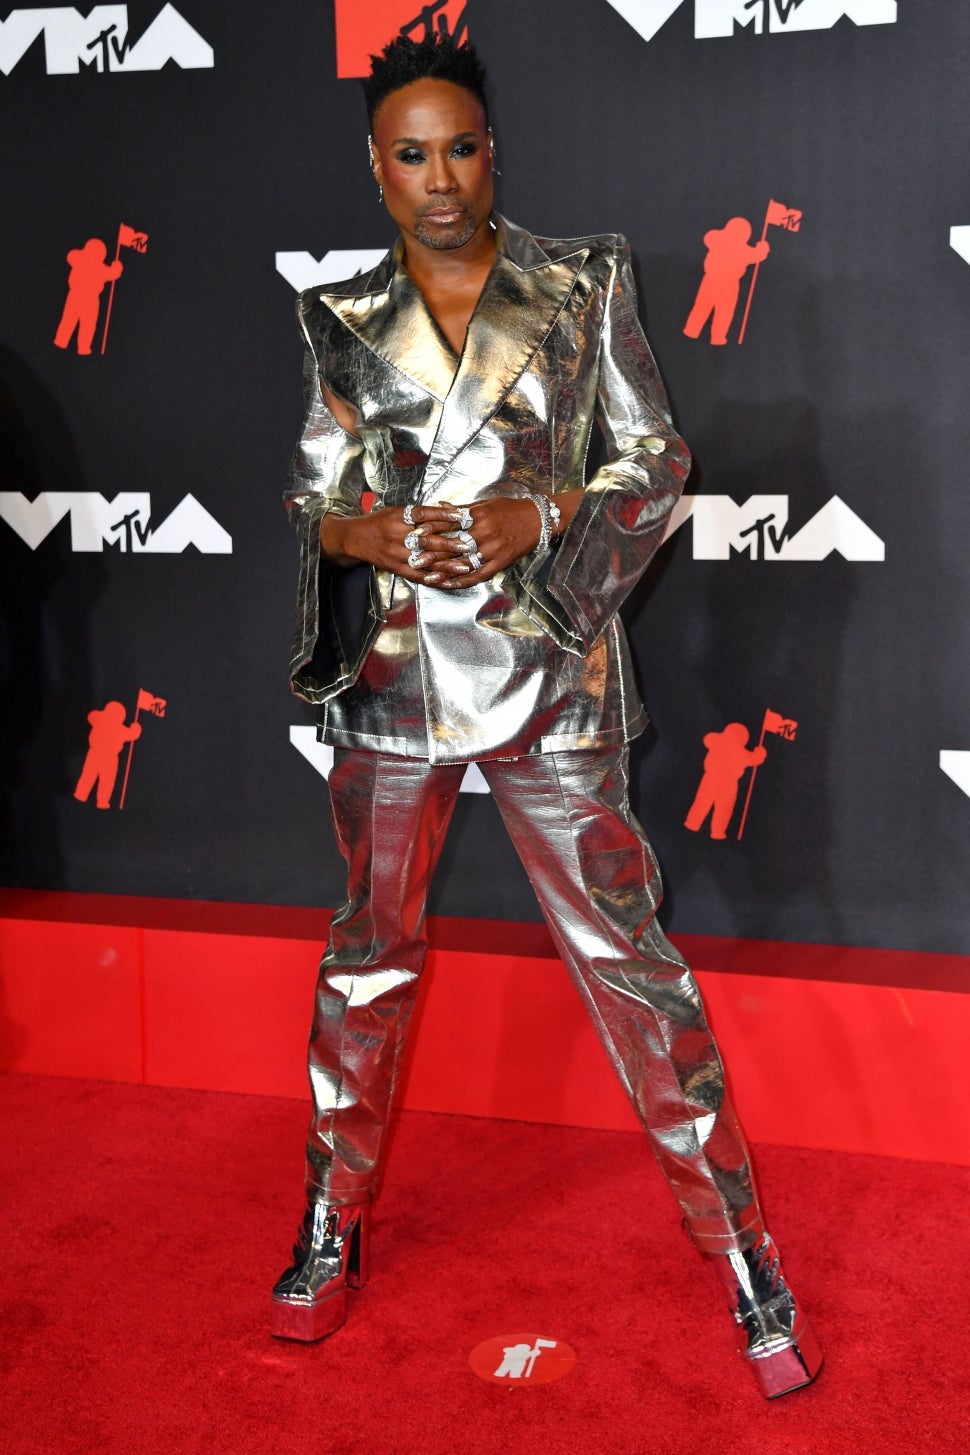 US actor and singer Billy Porter arrives for the 2021 MTV Video Music Awards at Barclays Center in Brooklyn, New York, September 12, 2021. 